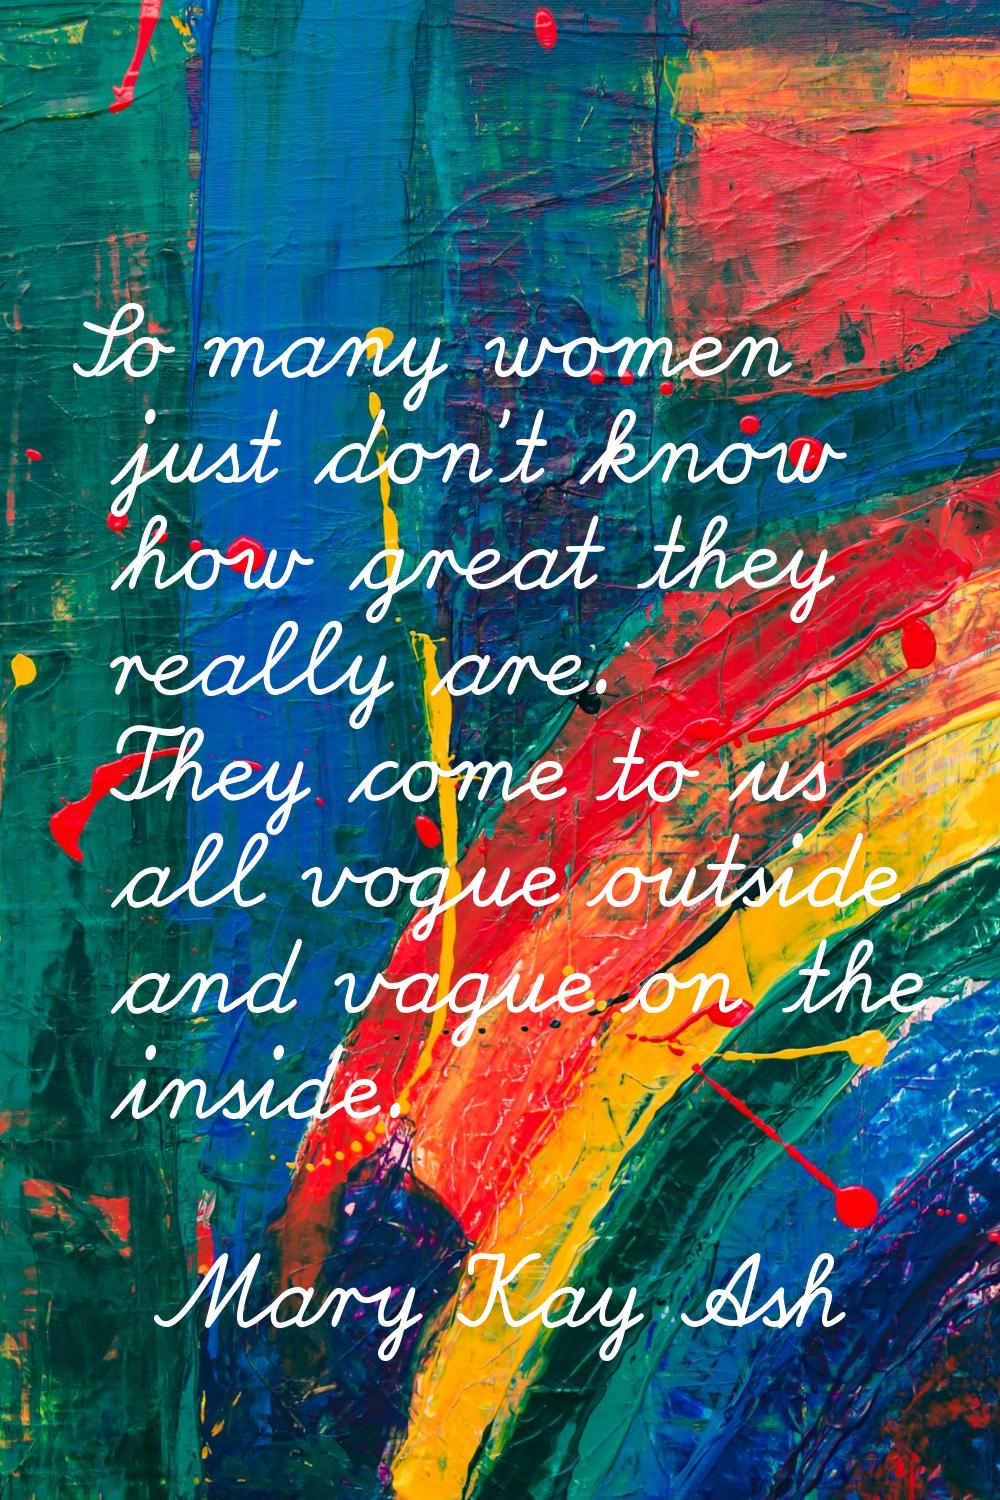 So many women just don't know how great they really are. They come to us all vogue outside and vagu